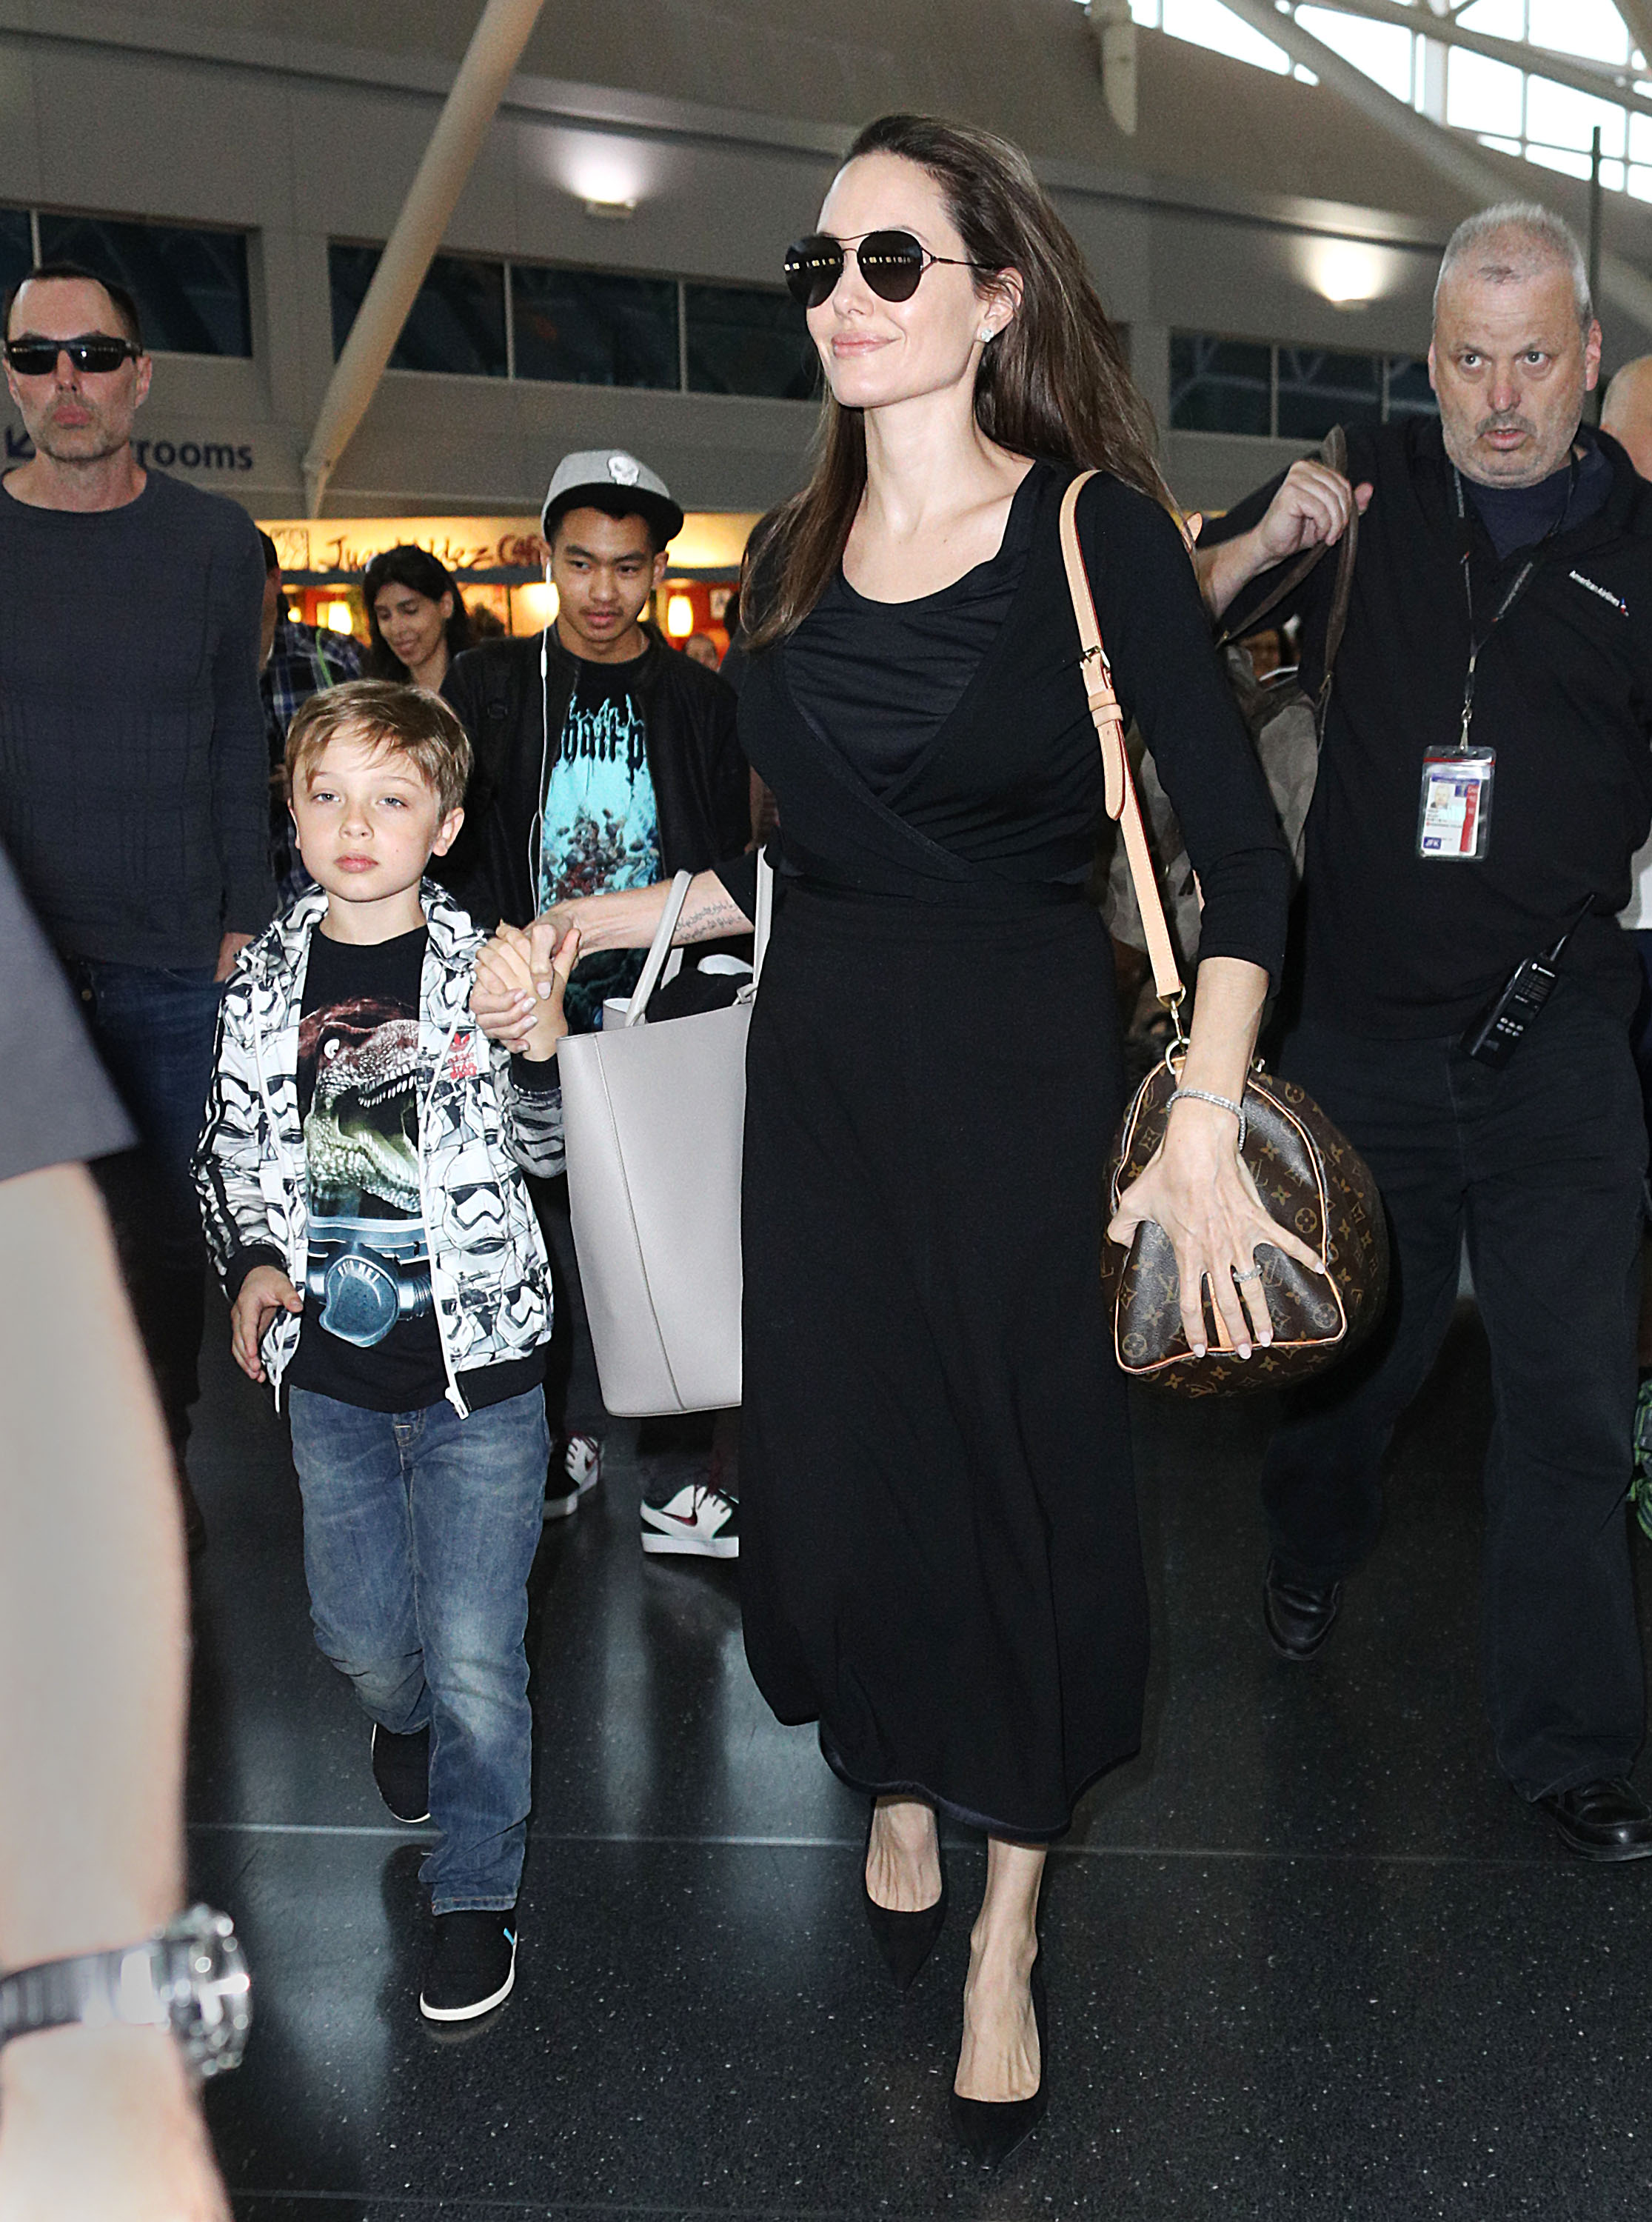 Angelina Jolie, Knox Jolie-Pitt, Maddox Jolie-Pitt, and James Haven on June 17, 2016 in New York City. | Source: Getty Images